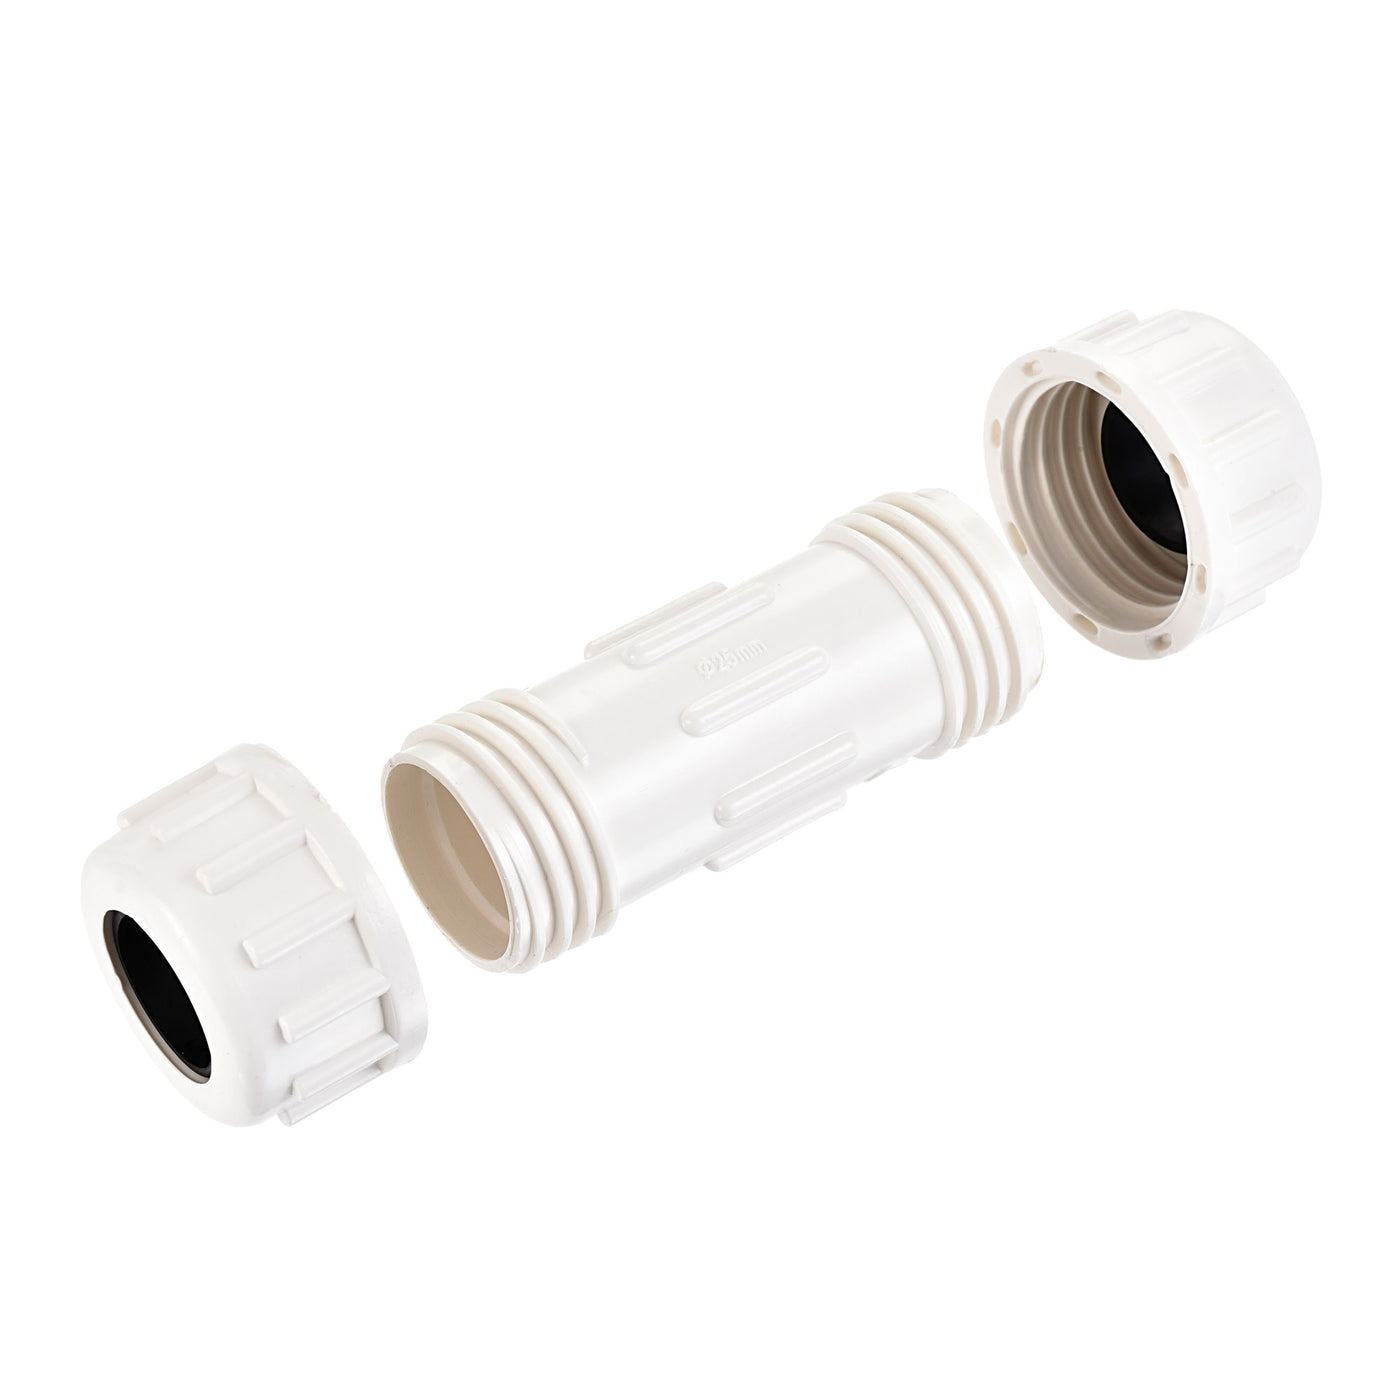 uxcell Uxcell PVC Compression Plumbing Coupling Straight Pipe Fitting Extension 25mm White 2Pcs